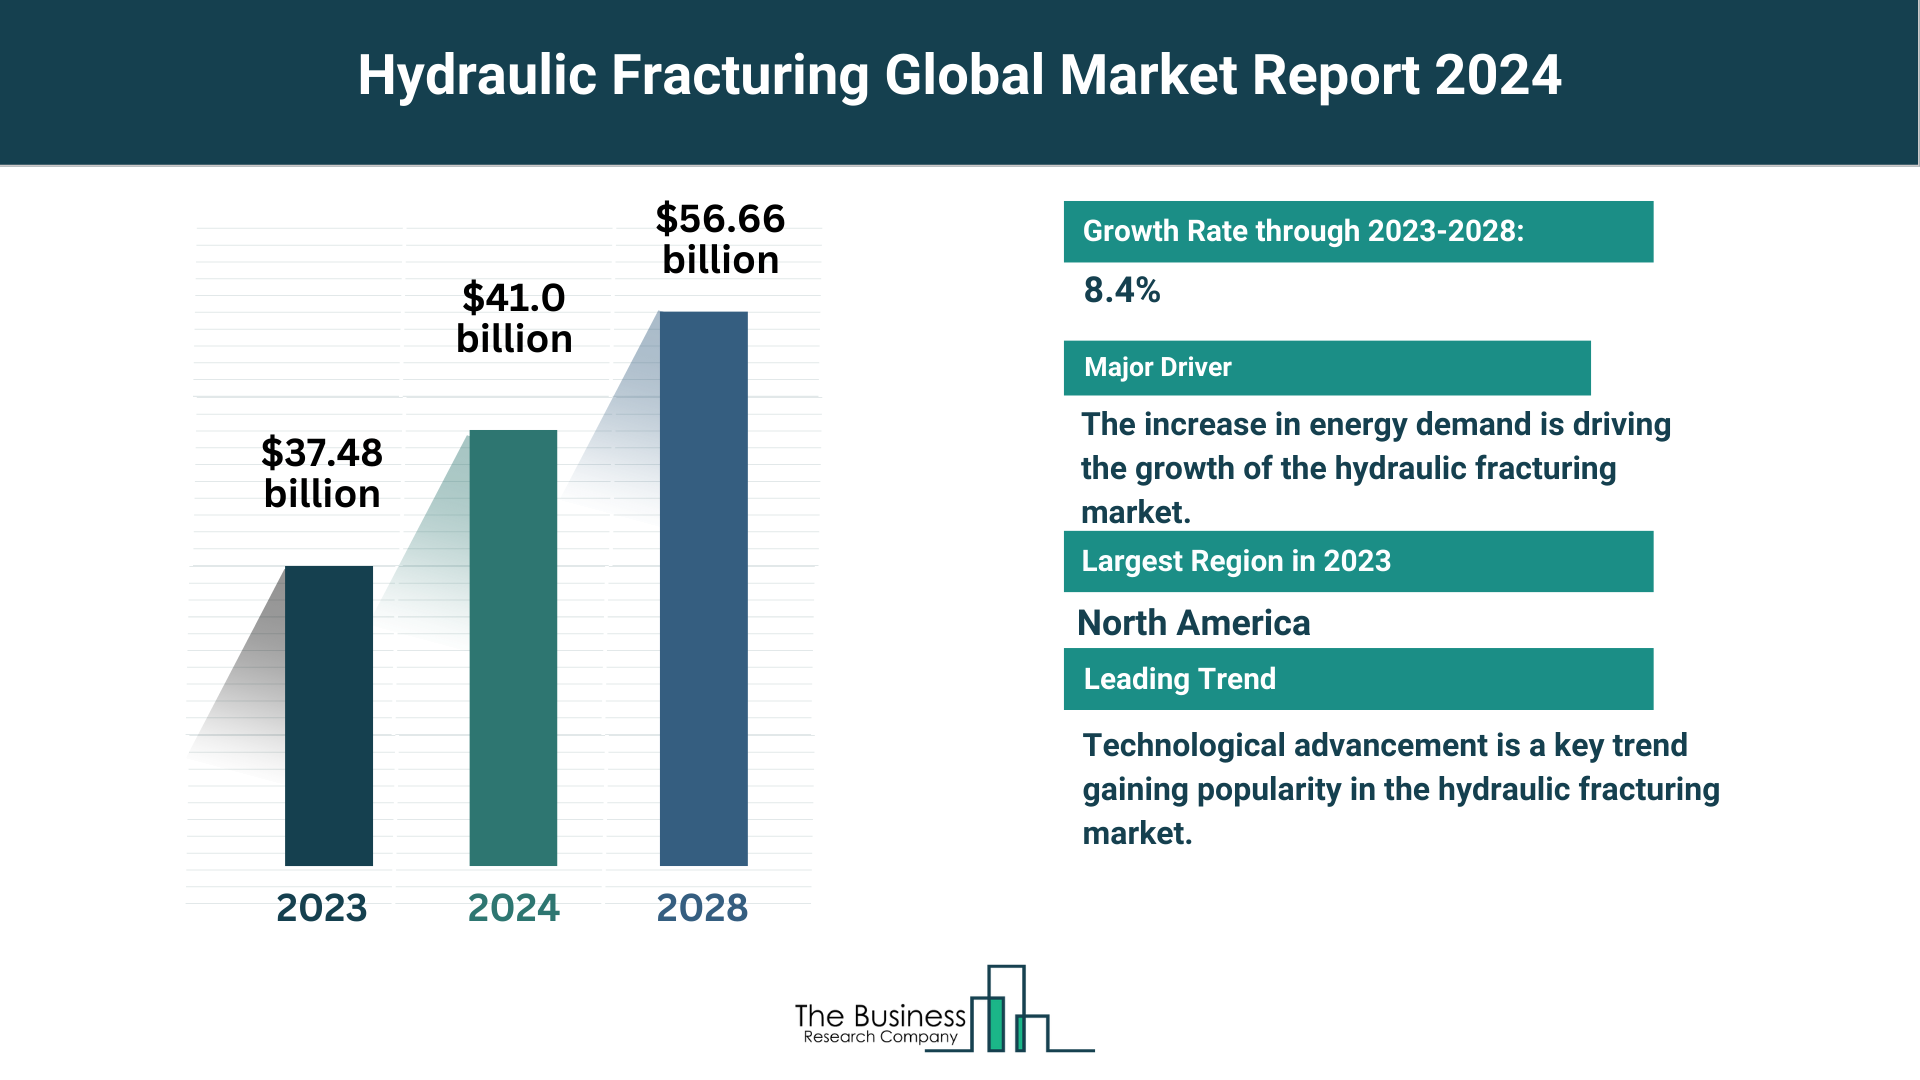 Global Hydraulic Fracturing Market